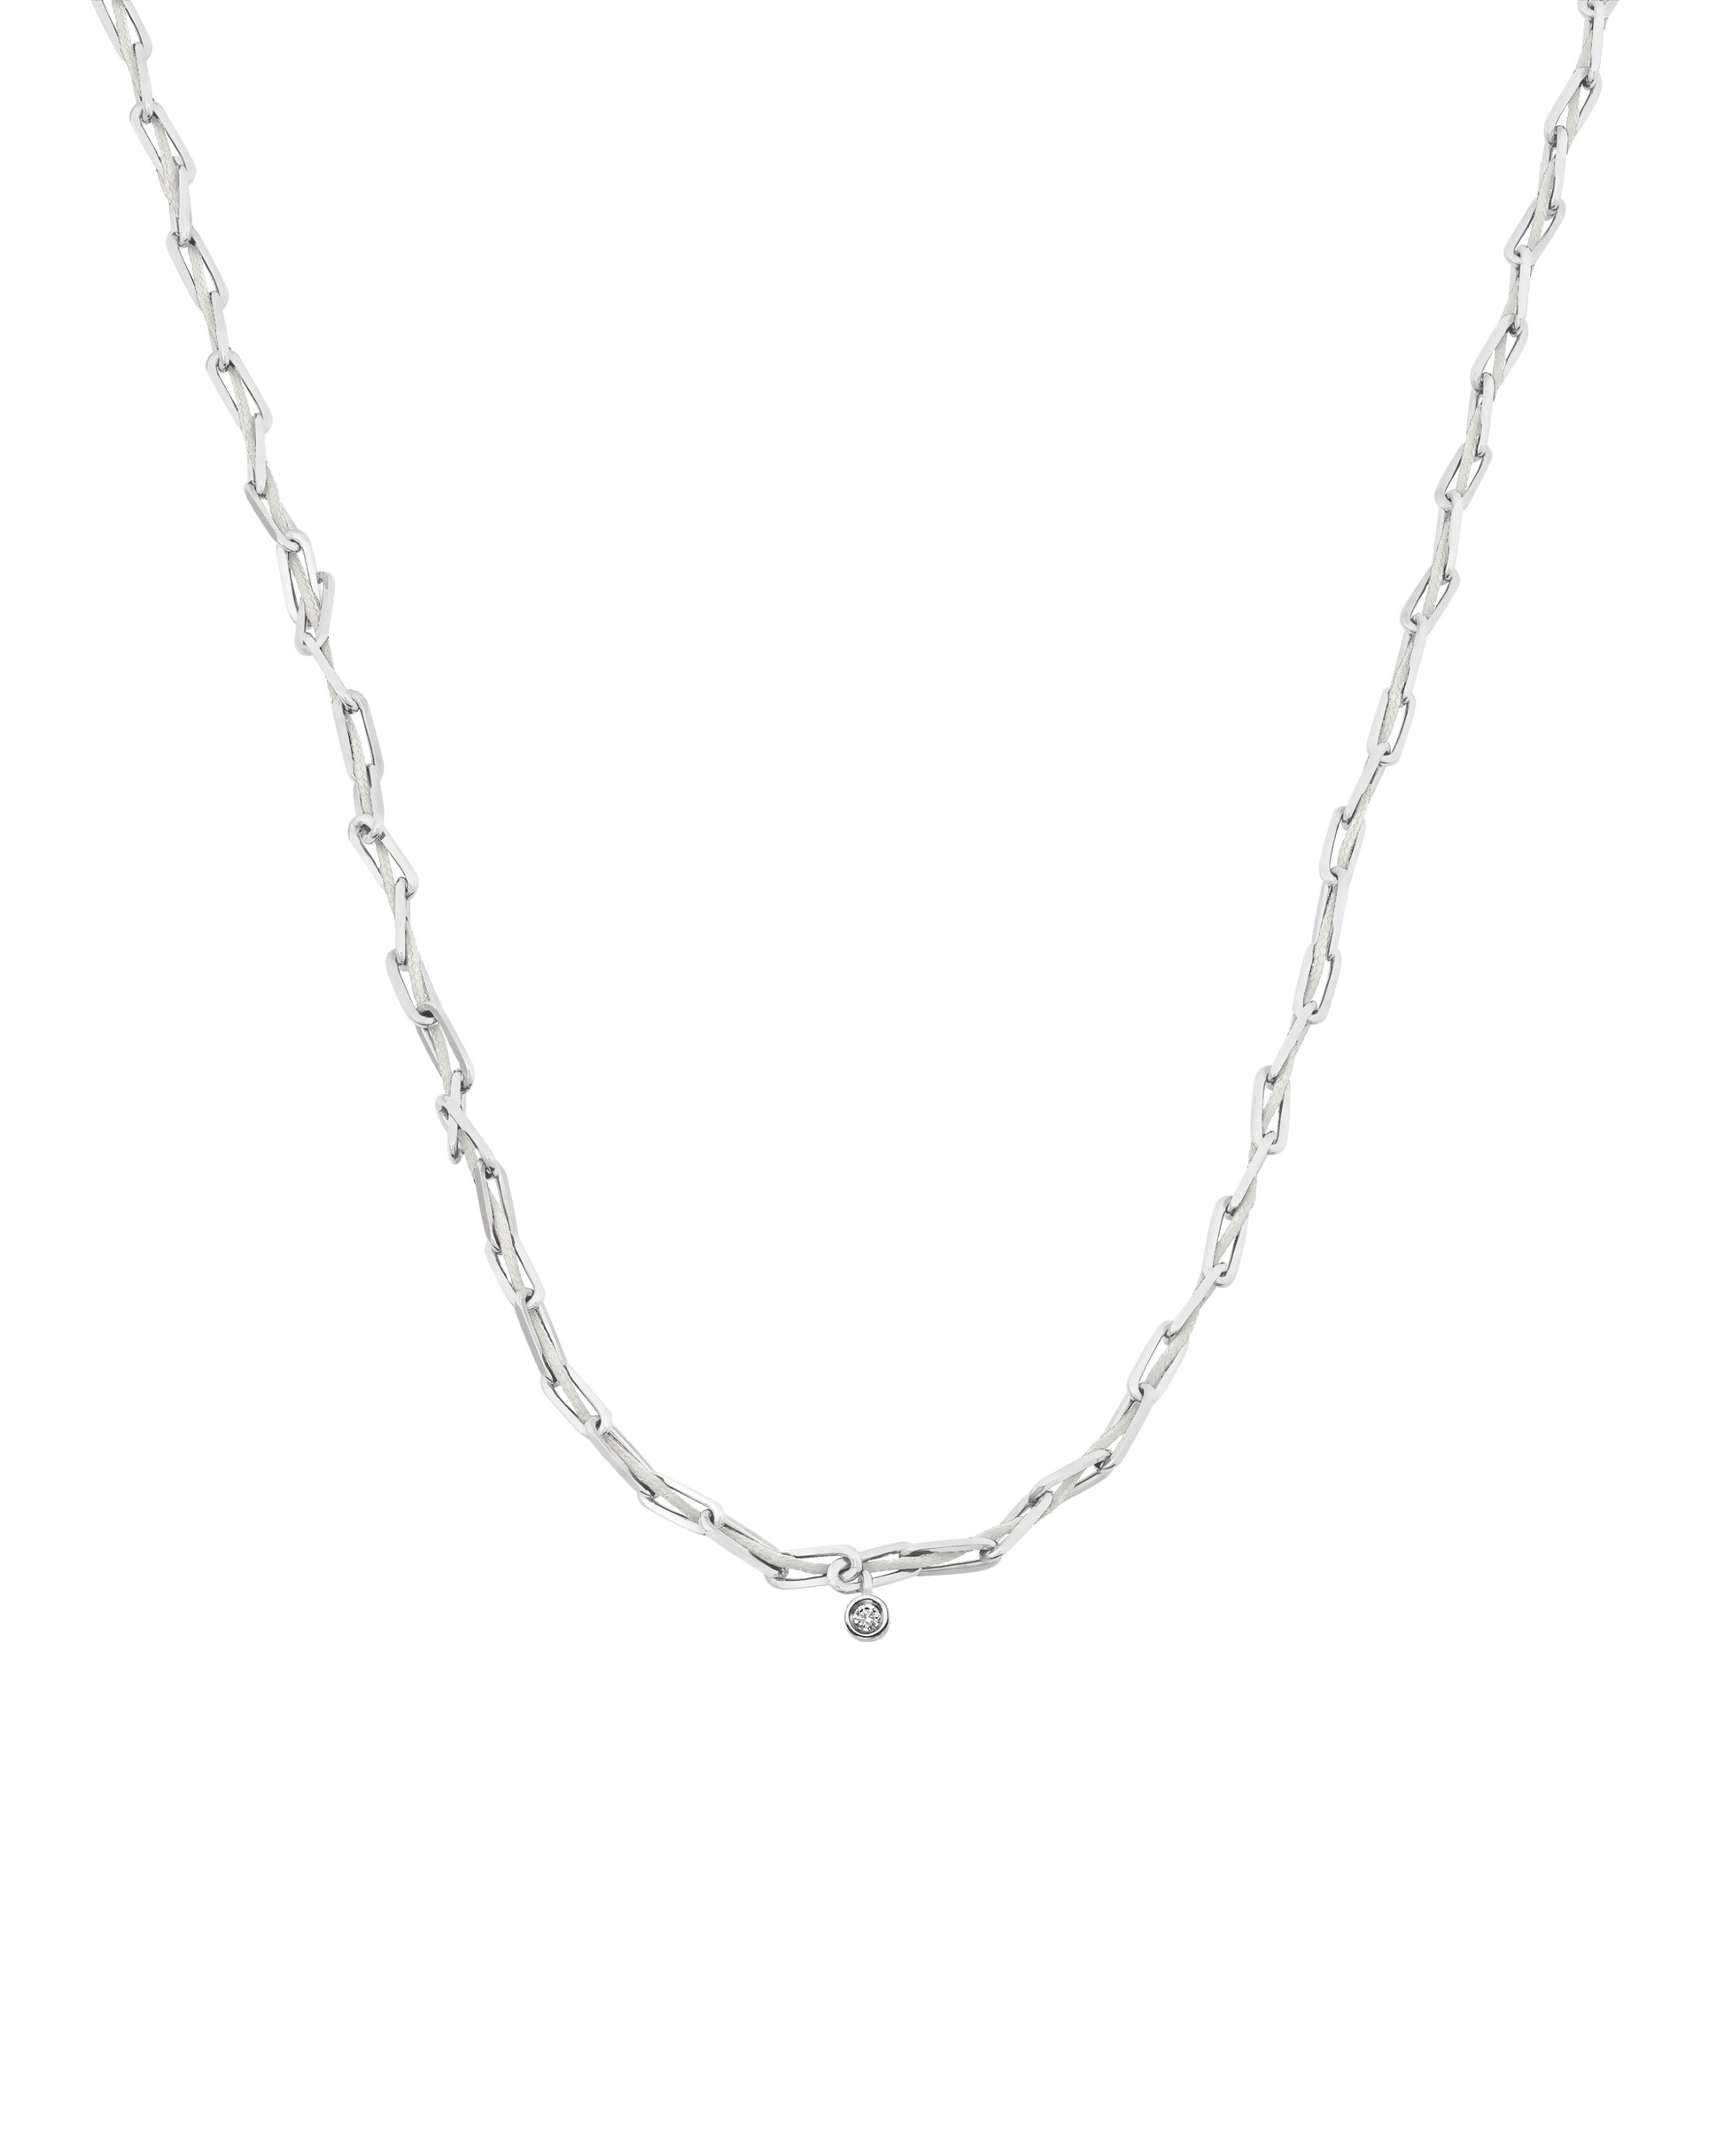 Twine Diamond Necklace - 925 Sterling Silver Necklaces magal-dev Pearl Small: 0.03ct 16"